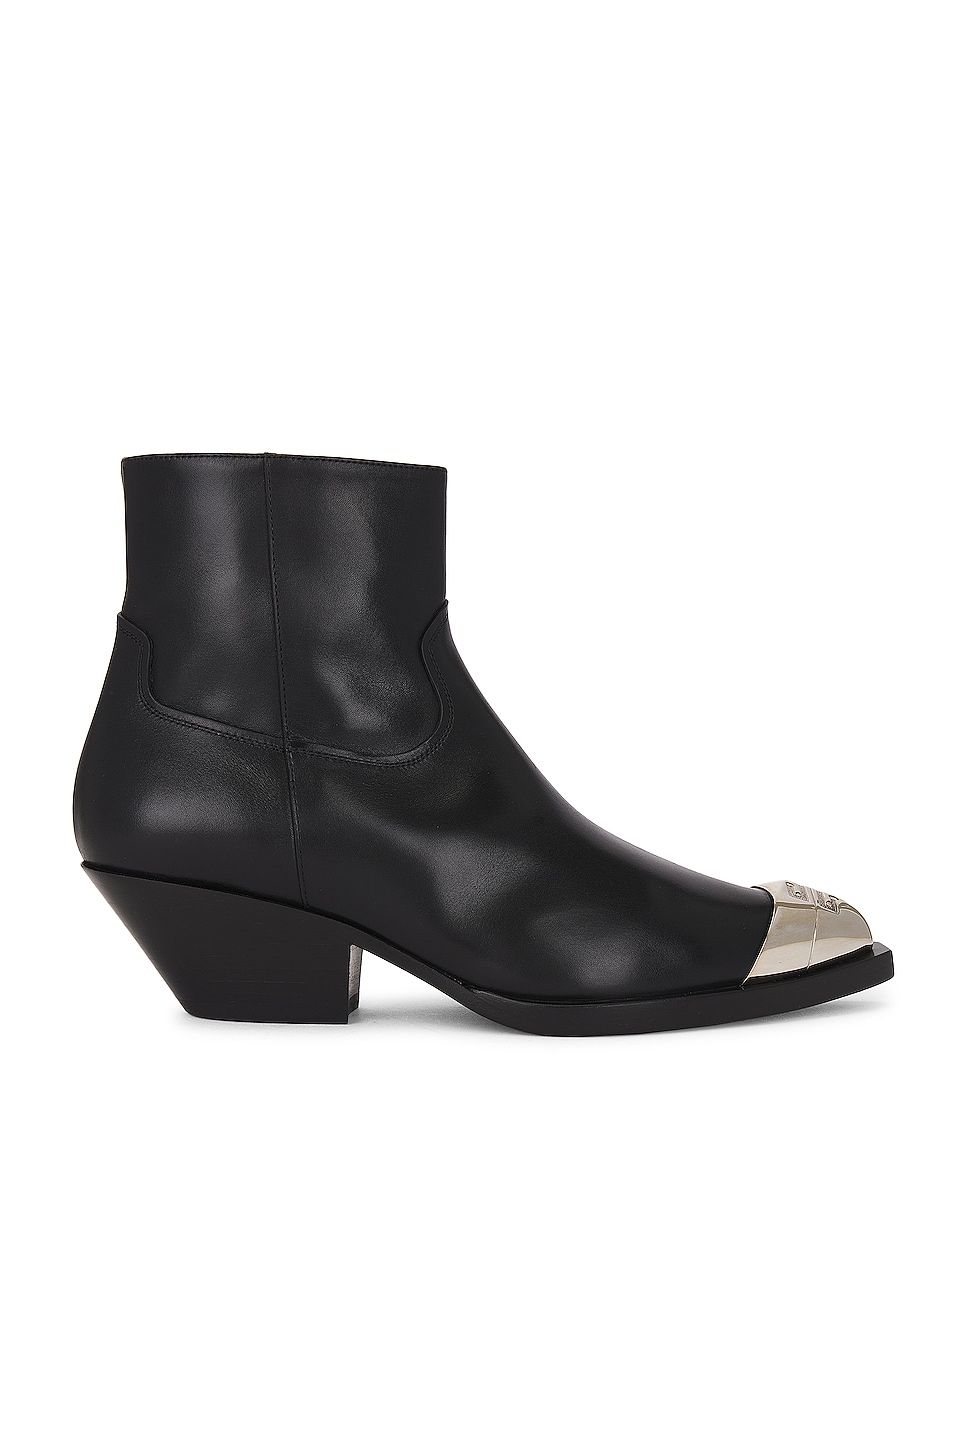 Image 1 of Givenchy Western Ankle Boot in Black